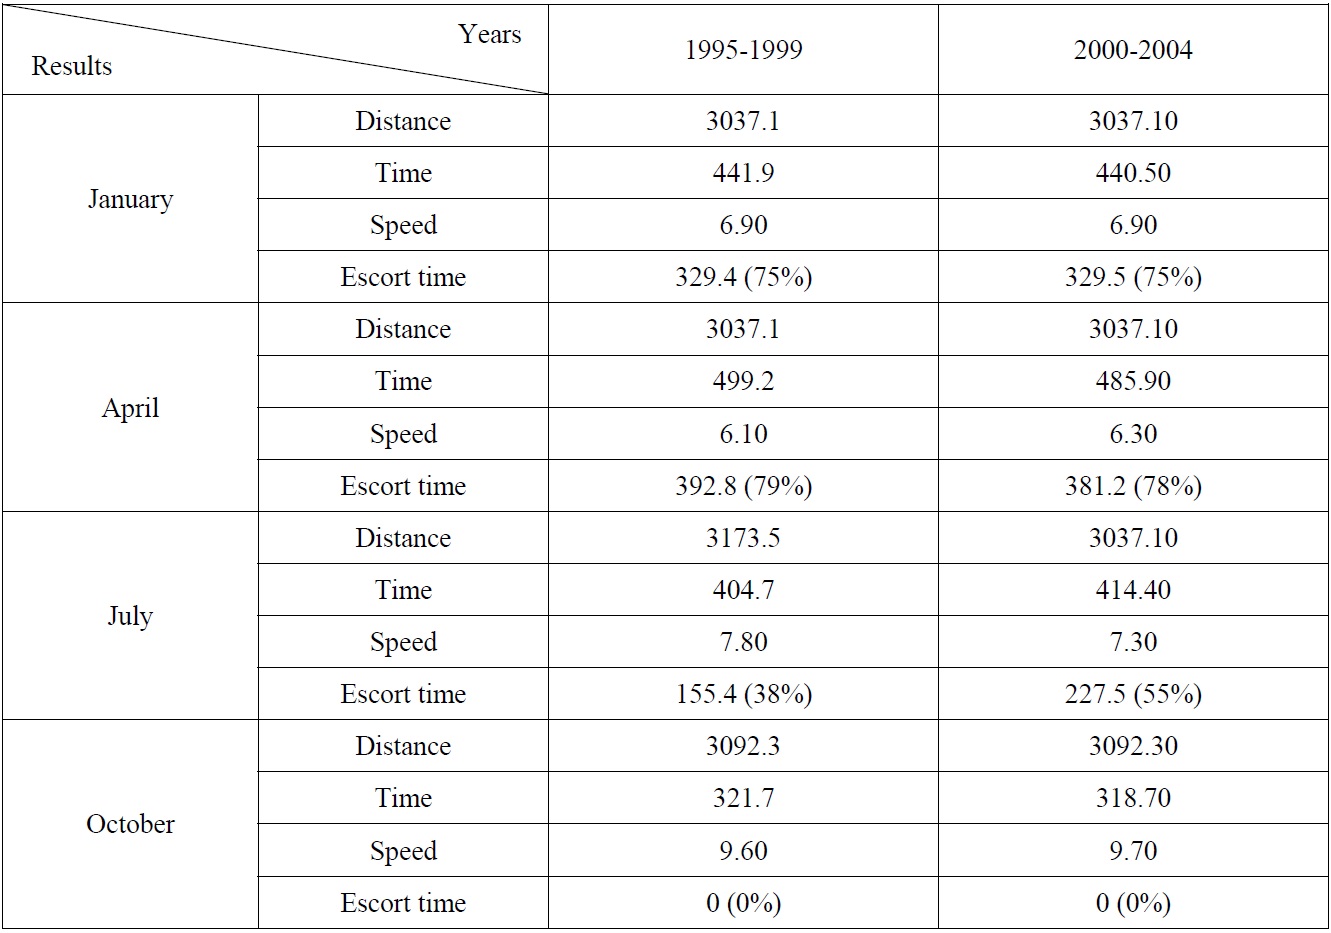 Simulation results during years 1995-1999 and 2000-2004.